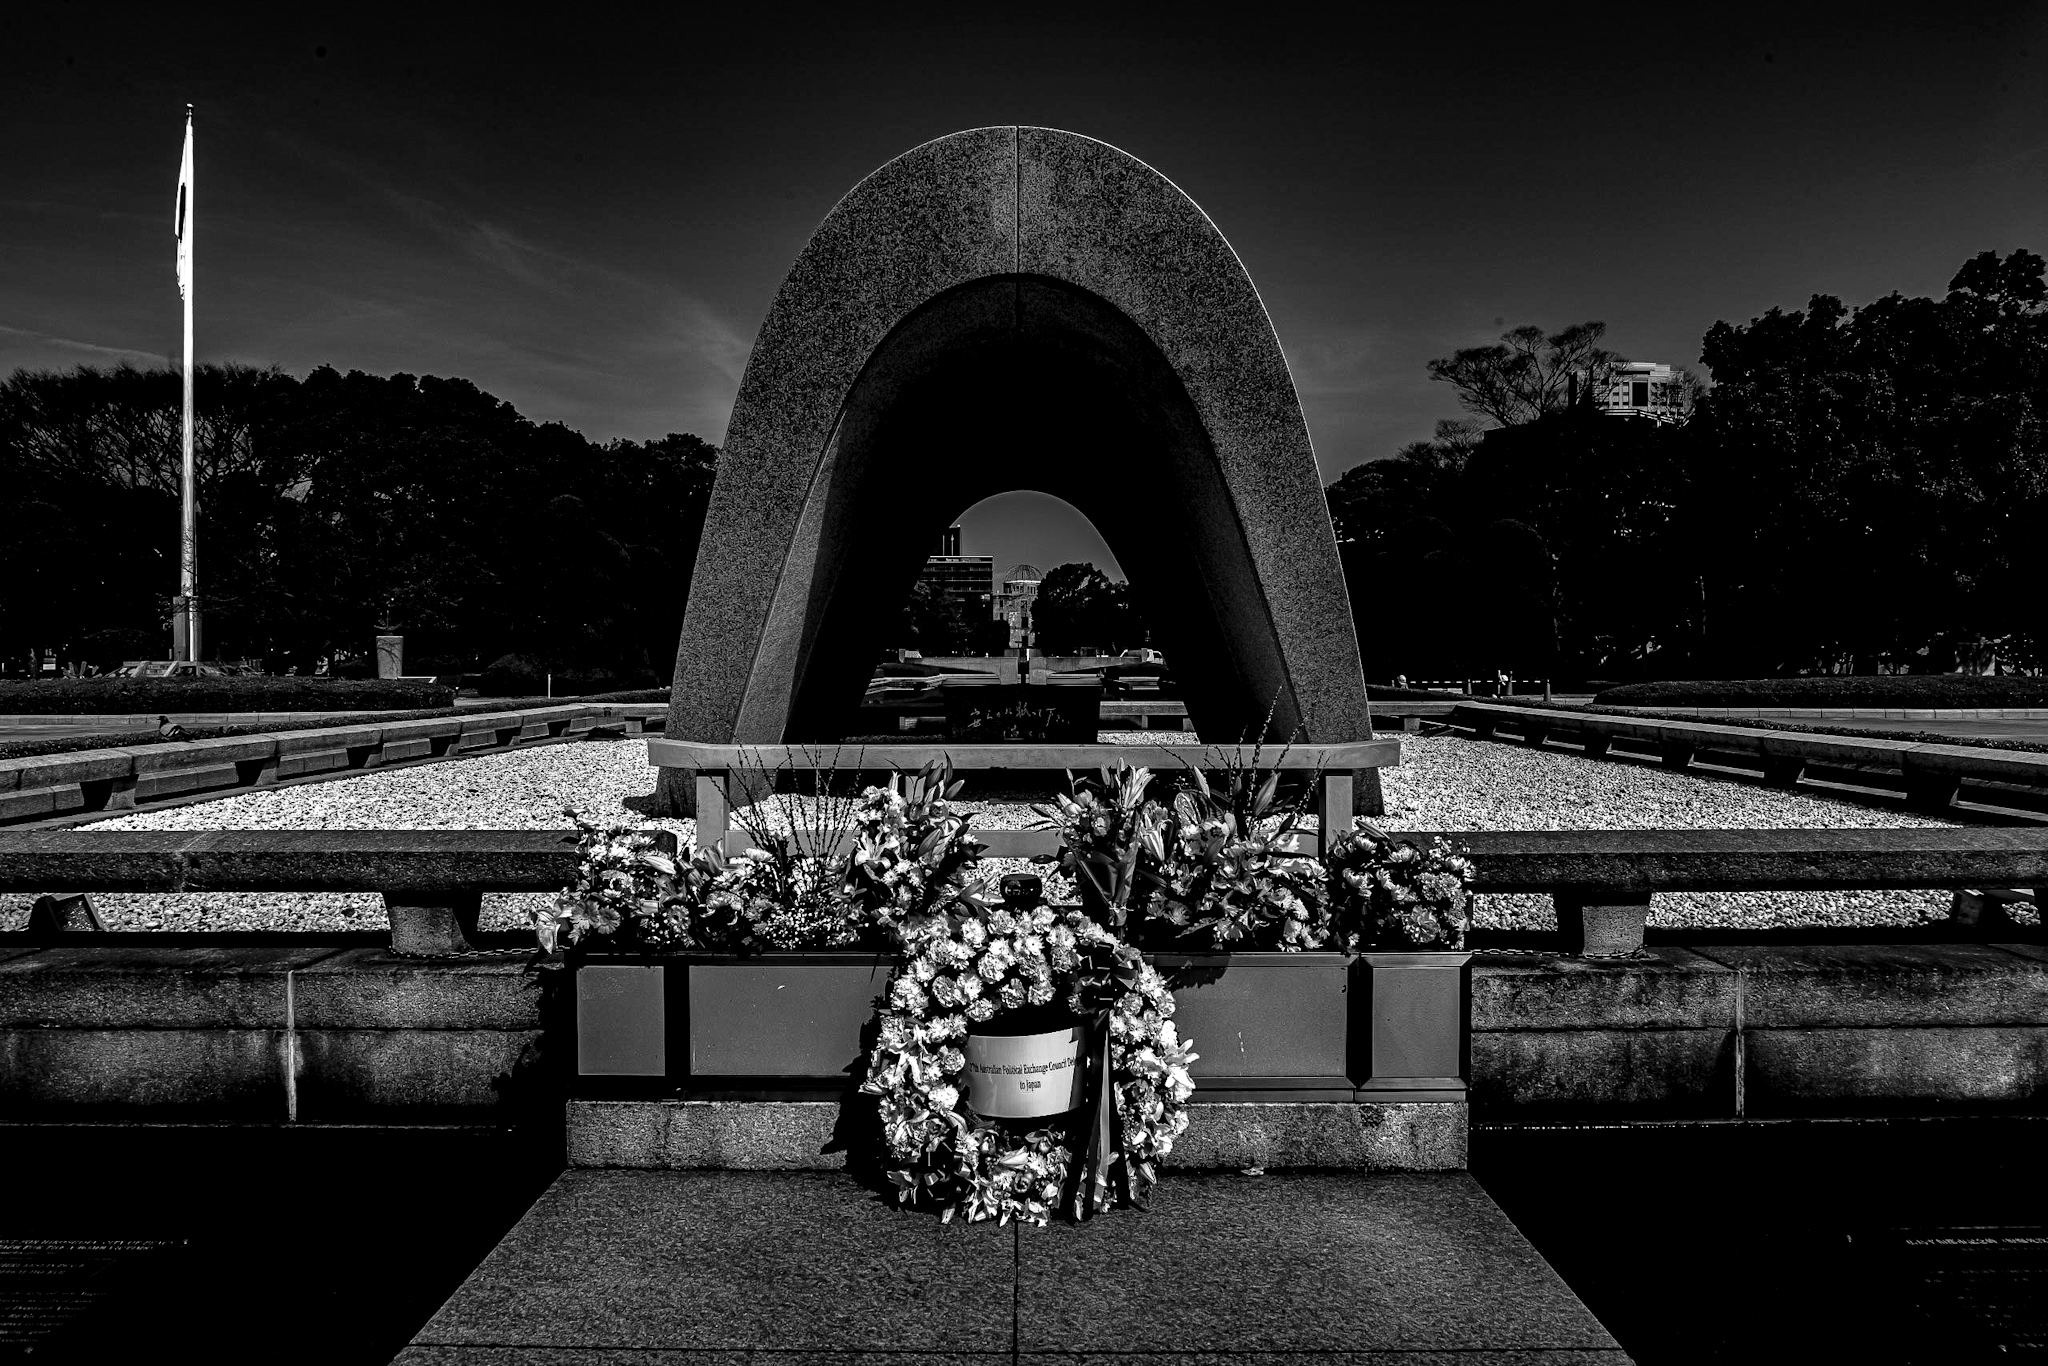 A memorial for all the lives lost due to the bombing sits directly in the middle of Hiroshima's peace park, many flowers and wreaths line the memorial all year round.